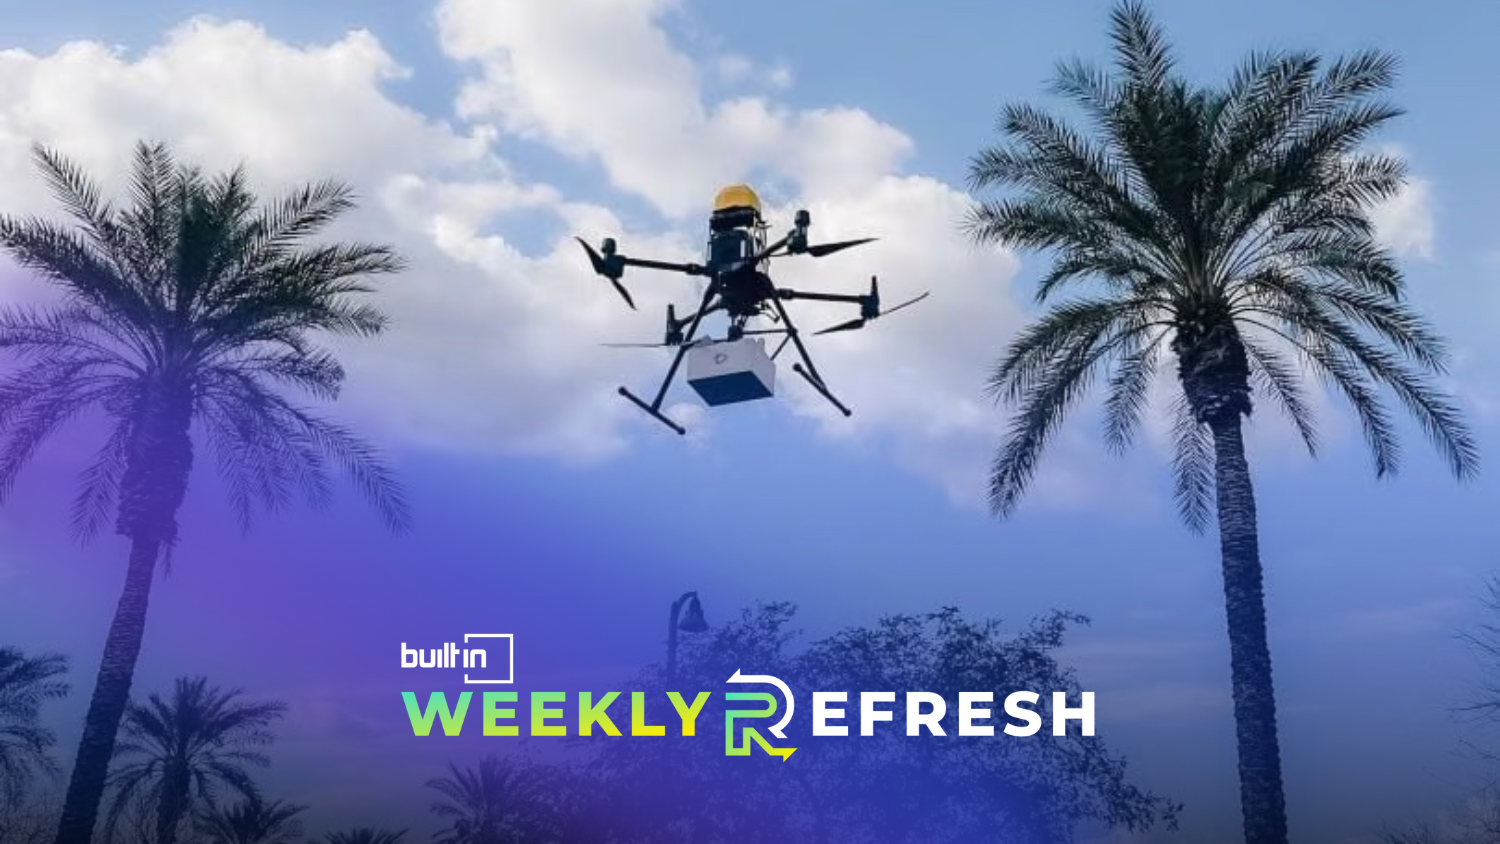 A Flyby Robotics drone flying in the sky between two palm trees.